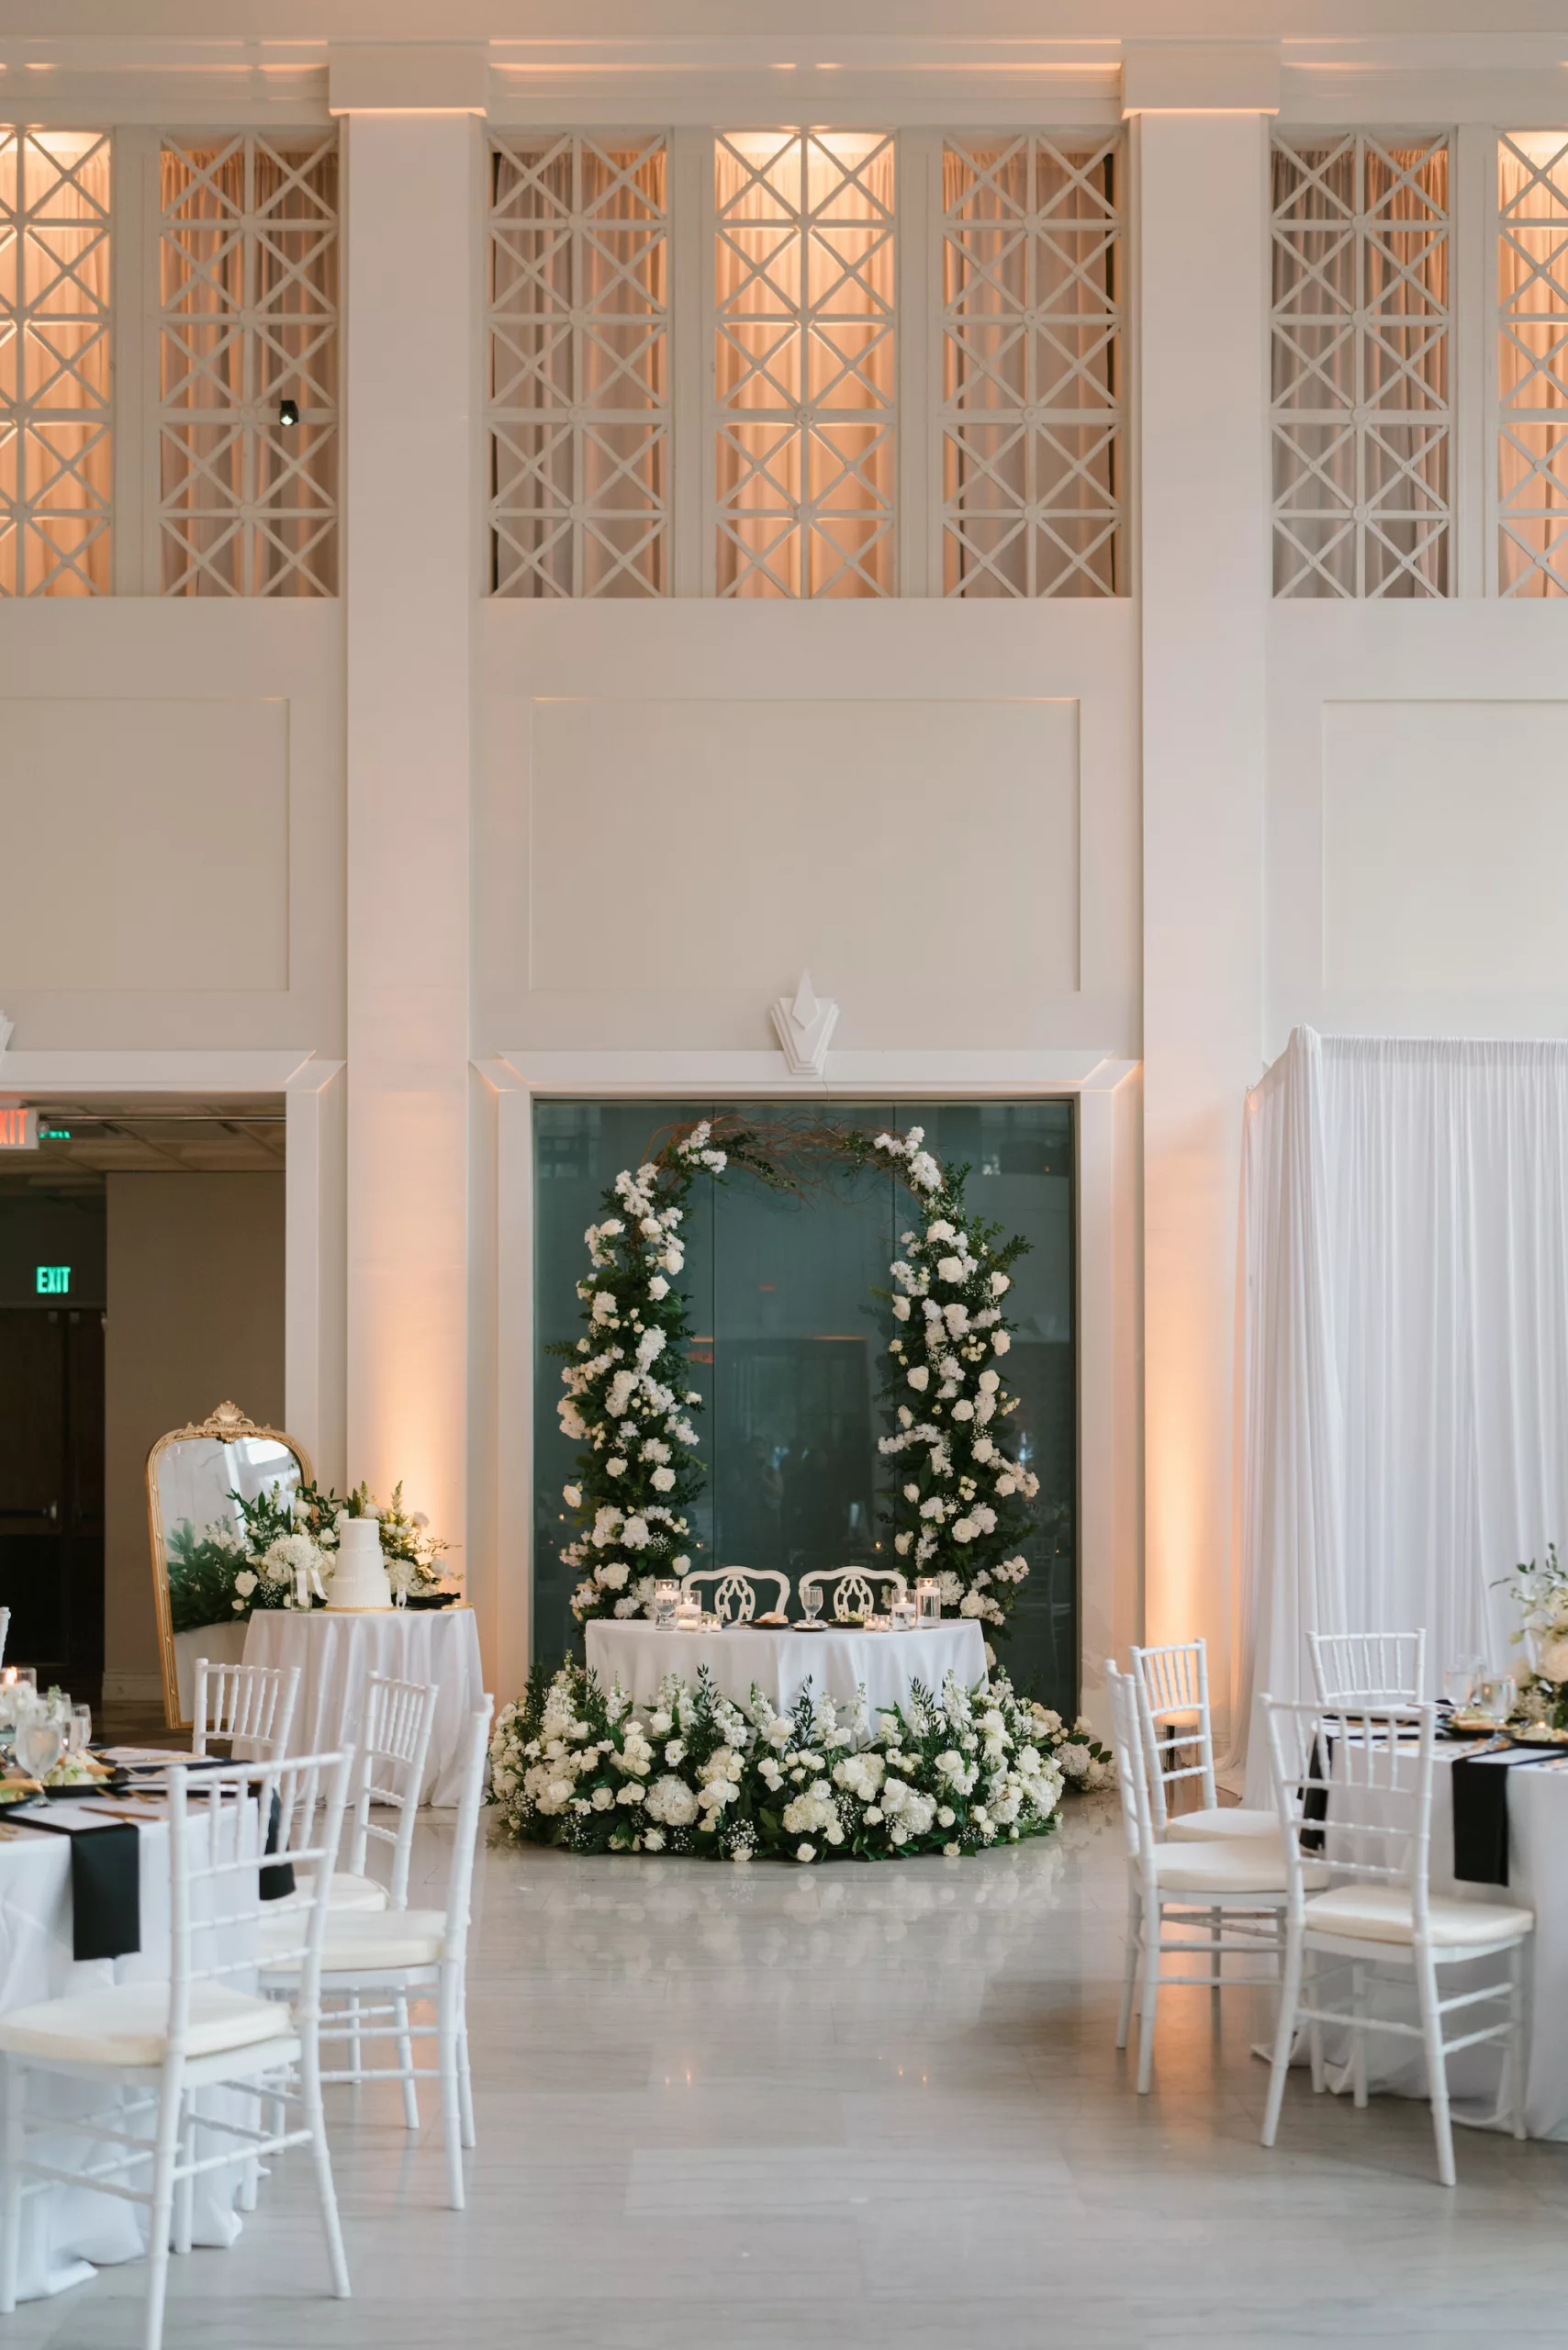 Classic Wedding Reception Sweetheart Table Inspiration | White Roses, Hydrangeas, Baby's Breath, and Greenery Floral Arrangement Backdrop Ideas | Tampa Bay Event Venue The Vault